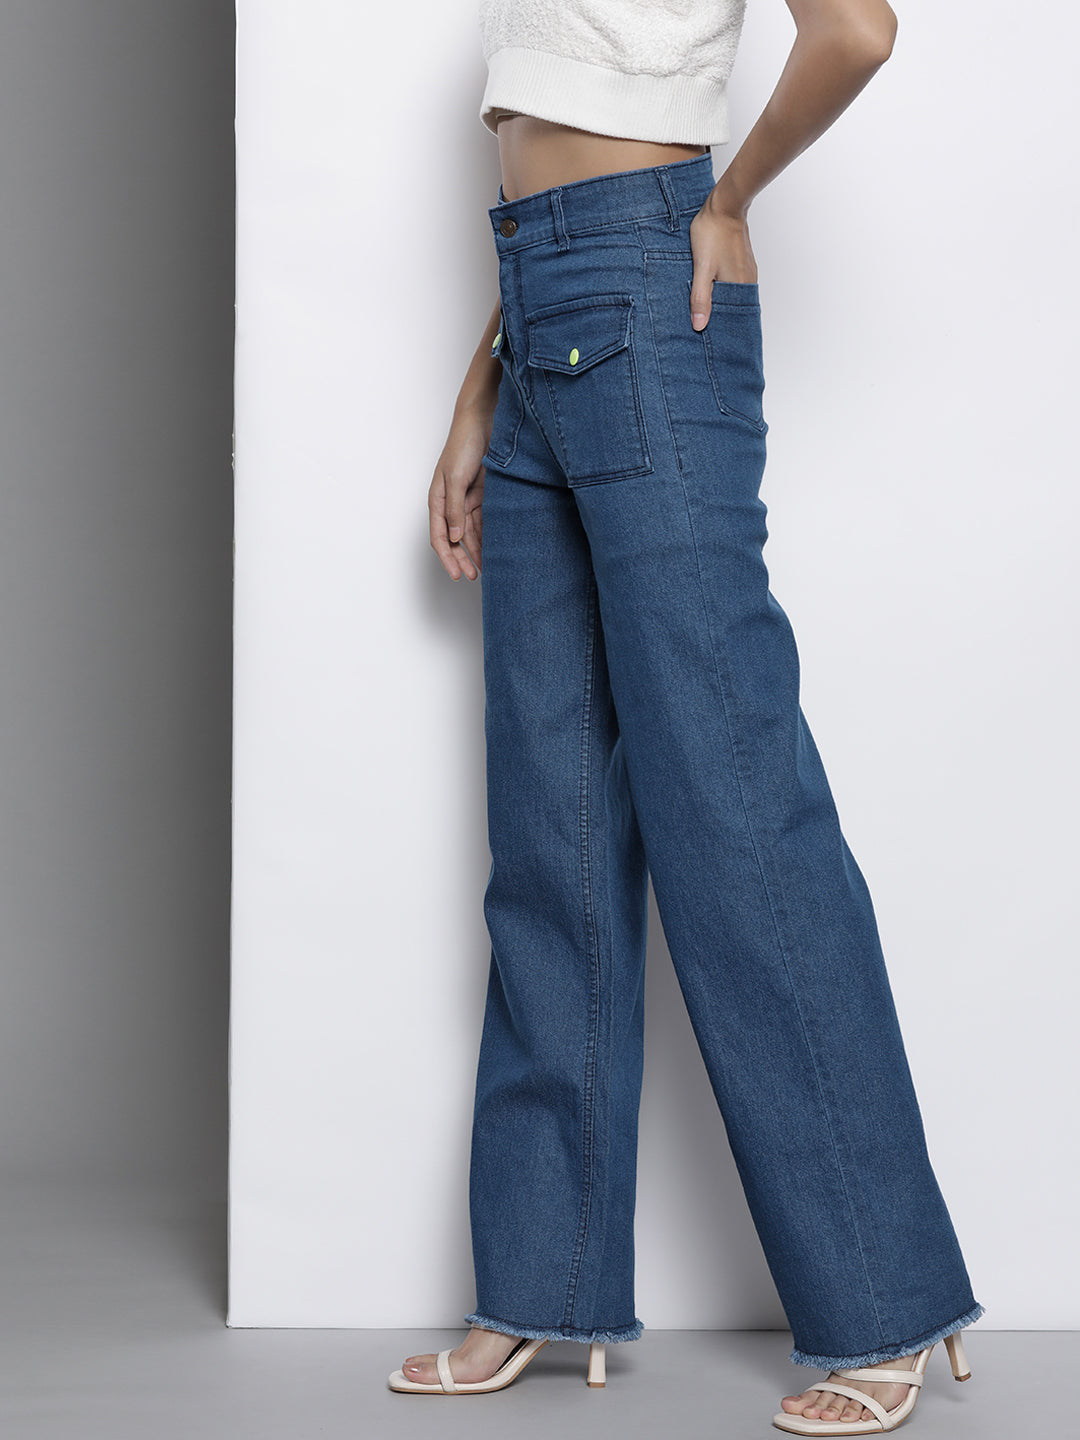 Women Jeans With Front Pockets